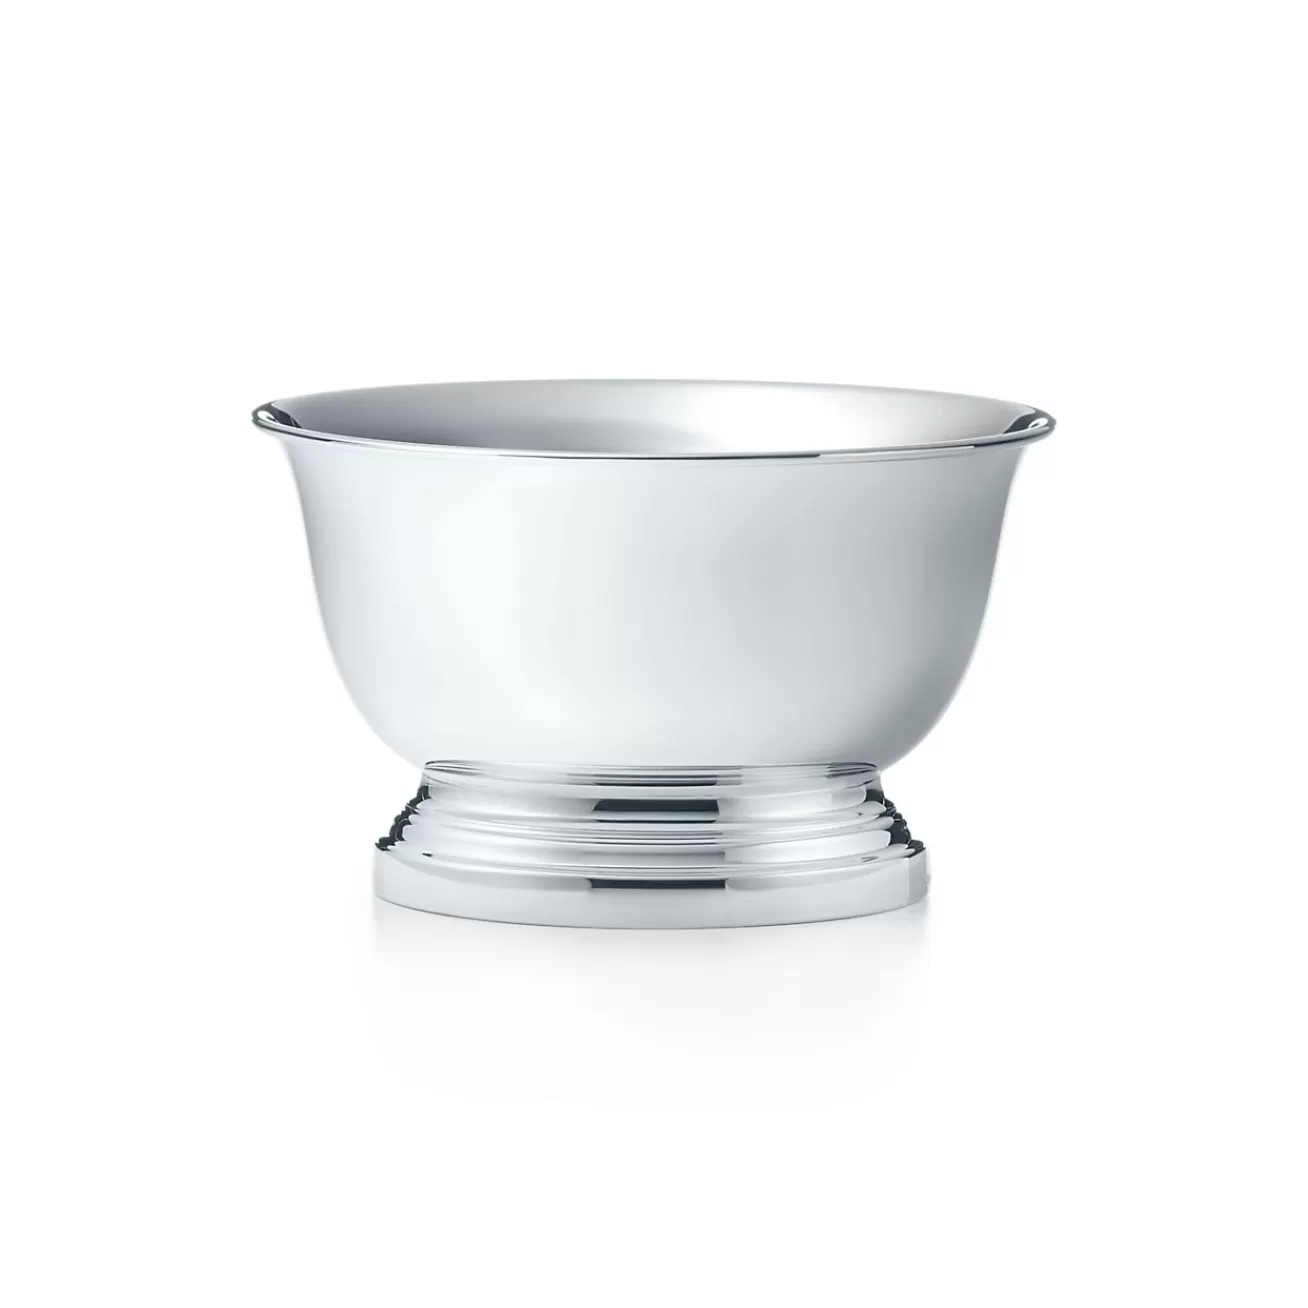 Tiffany & Co. Dog bowl in sterling silver, small. | ^ Stationery, Games & Unique Objects | Games & Novelties